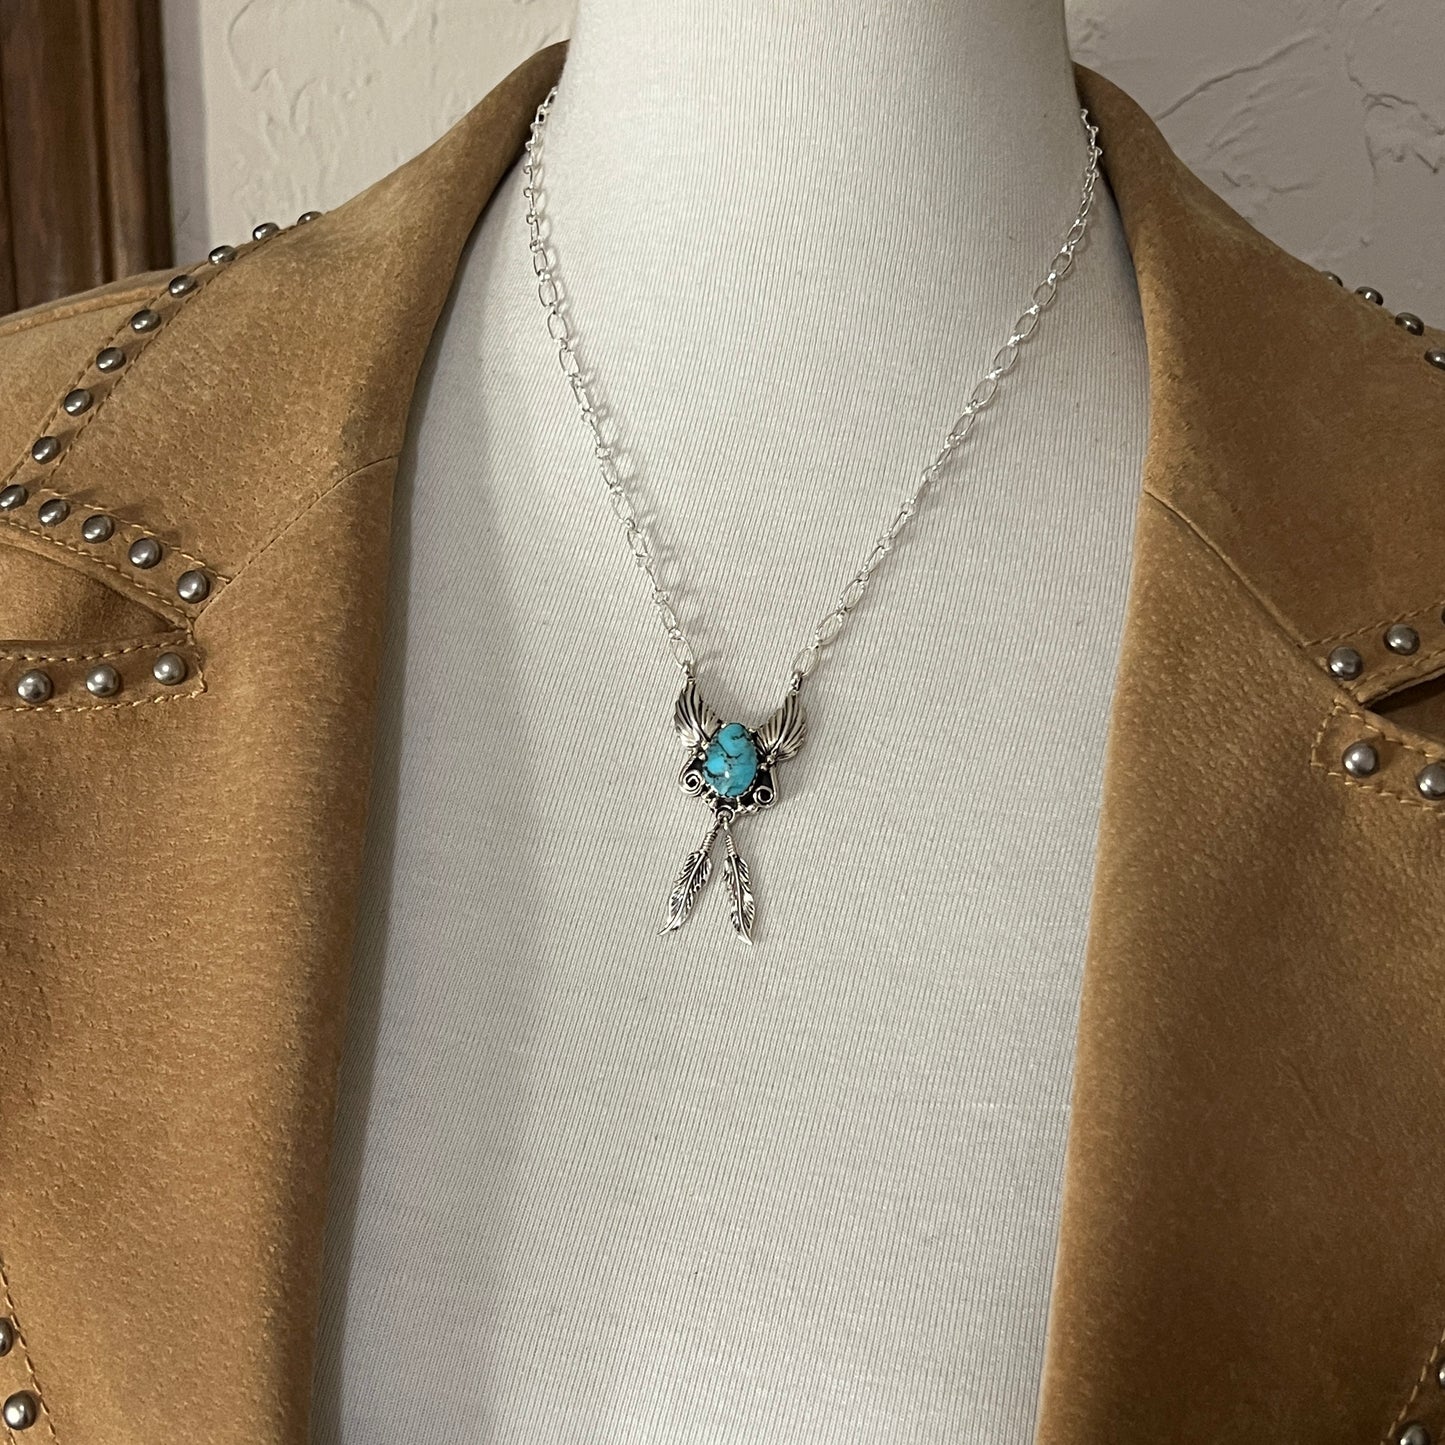 18" Blue Kingman turquoise feather necklace #2, sterling silver, Navajo handmade by Sadie Jim